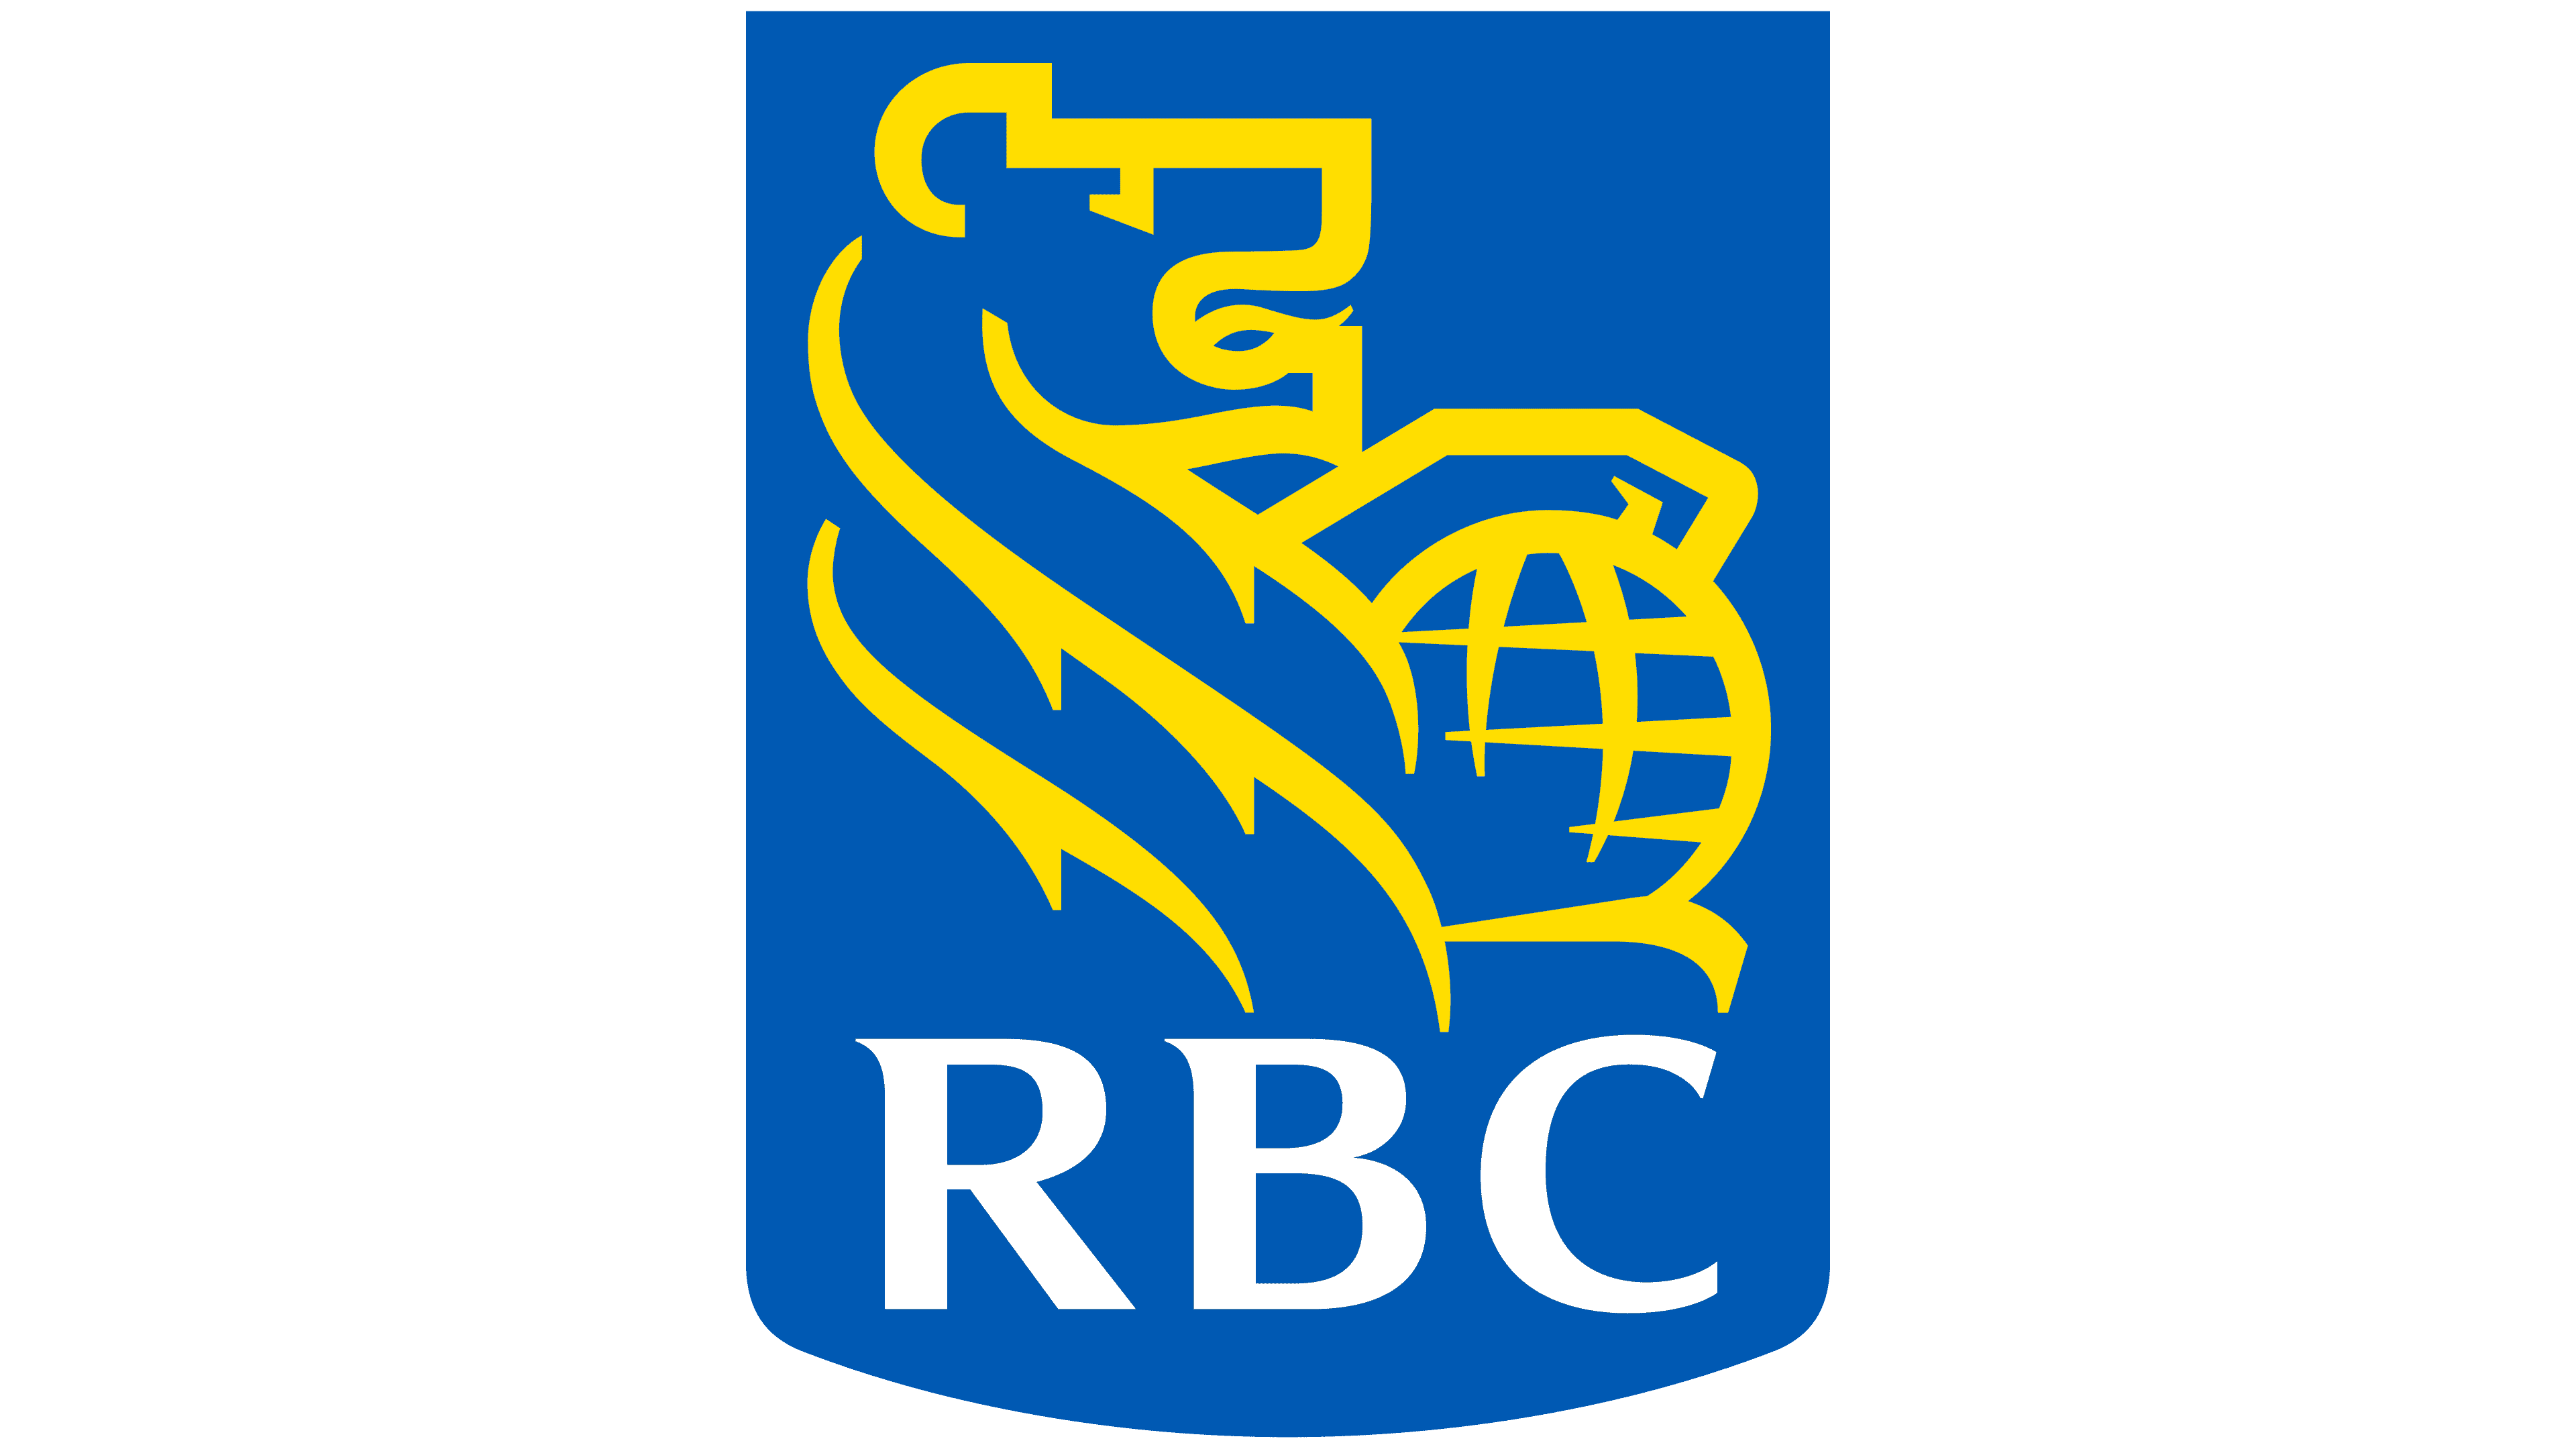 RBC's logo which is a blue rectangle with a yellow lion inside